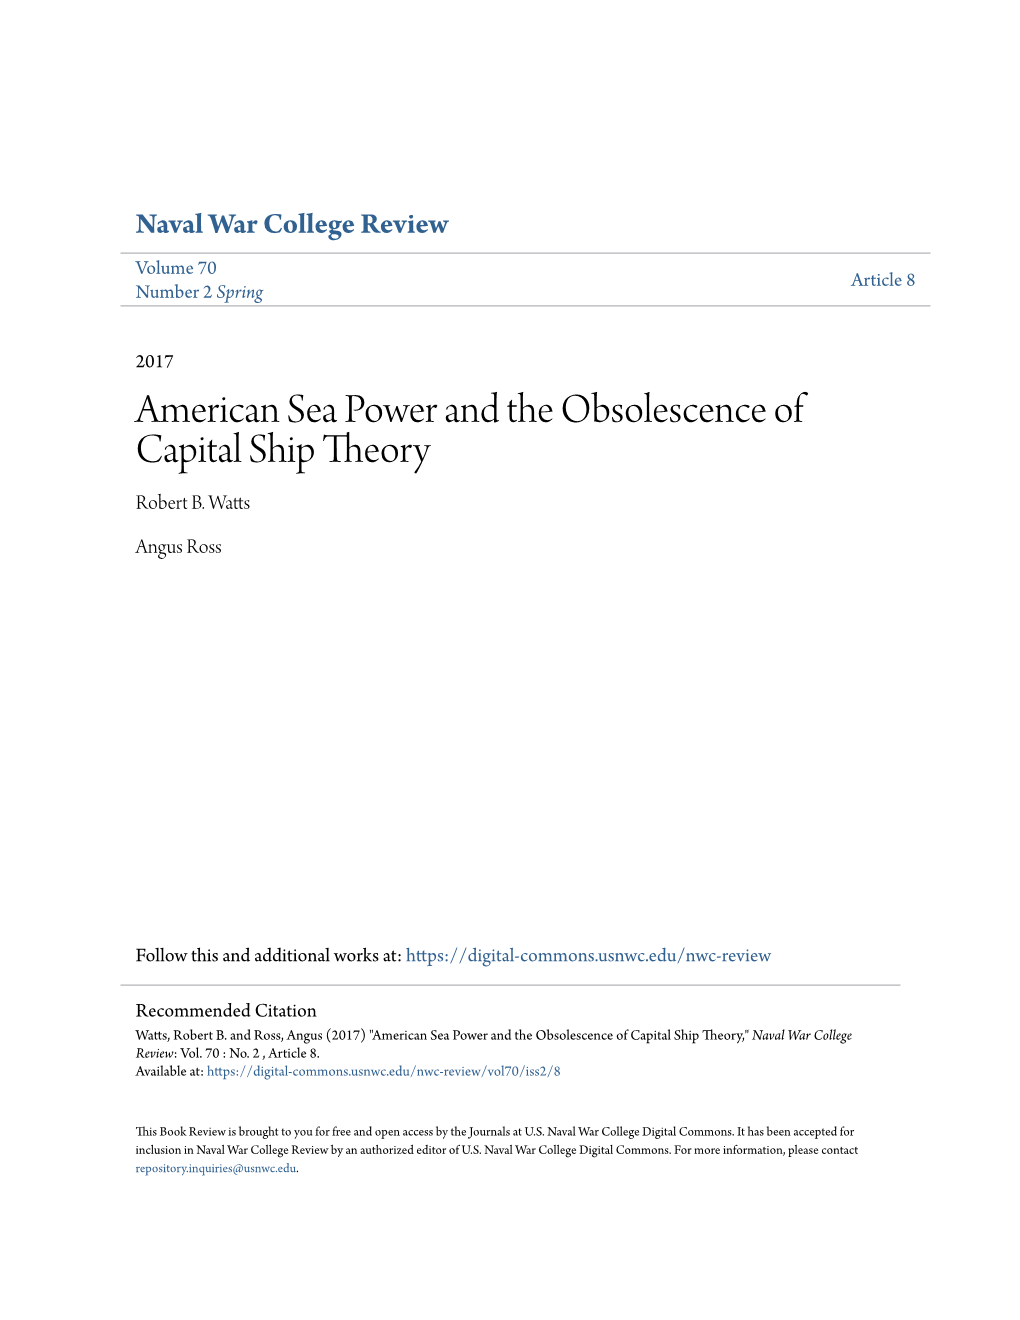 American Sea Power and the Obsolescence of Capital Ship Theory Robert B